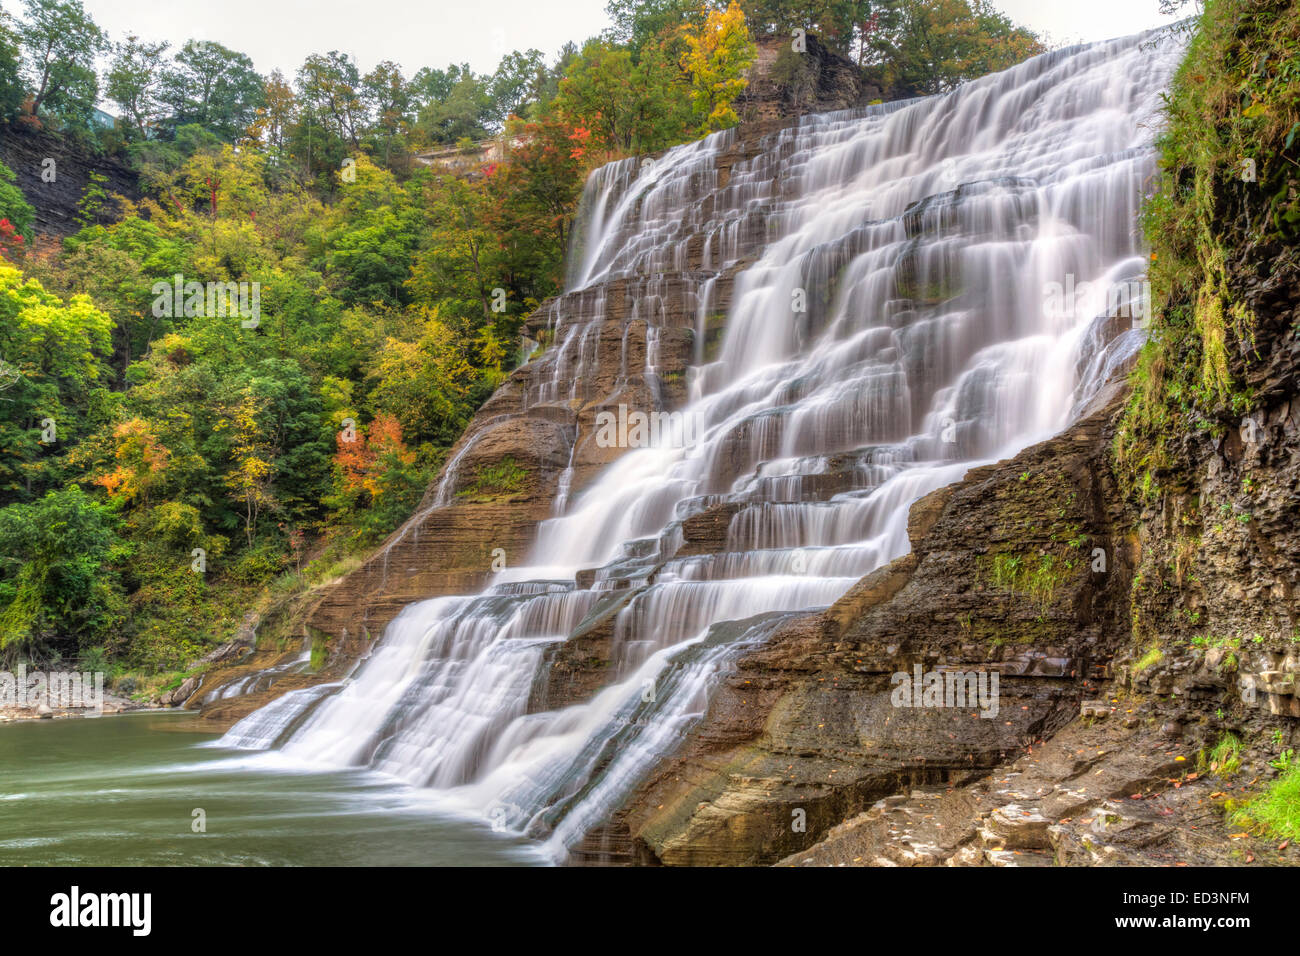 Ithaca Falls - one of the most powerful waterfalls in the region, near the Cornell Campus in Ithaca, New York Stock Photo